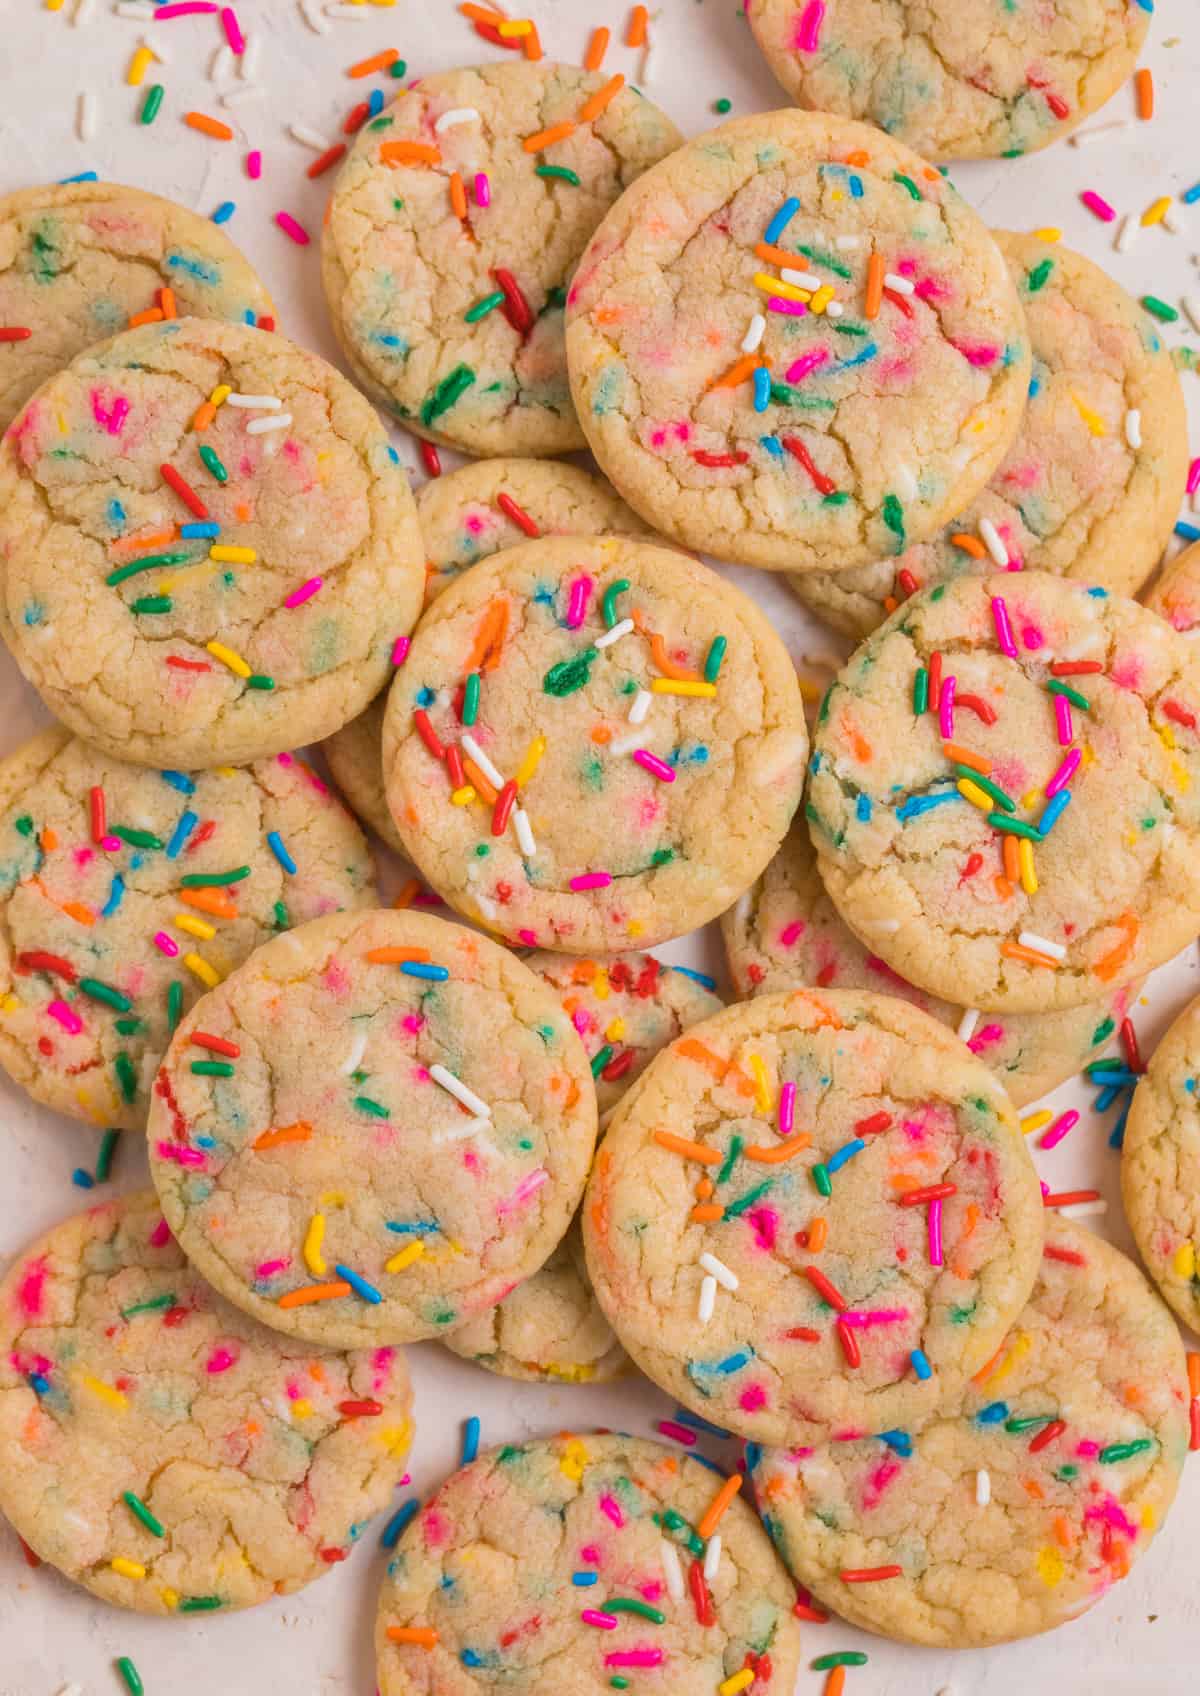 Birthday cake funfetti cookies laying on counter with rainbow sprinkles over top and surrounding.